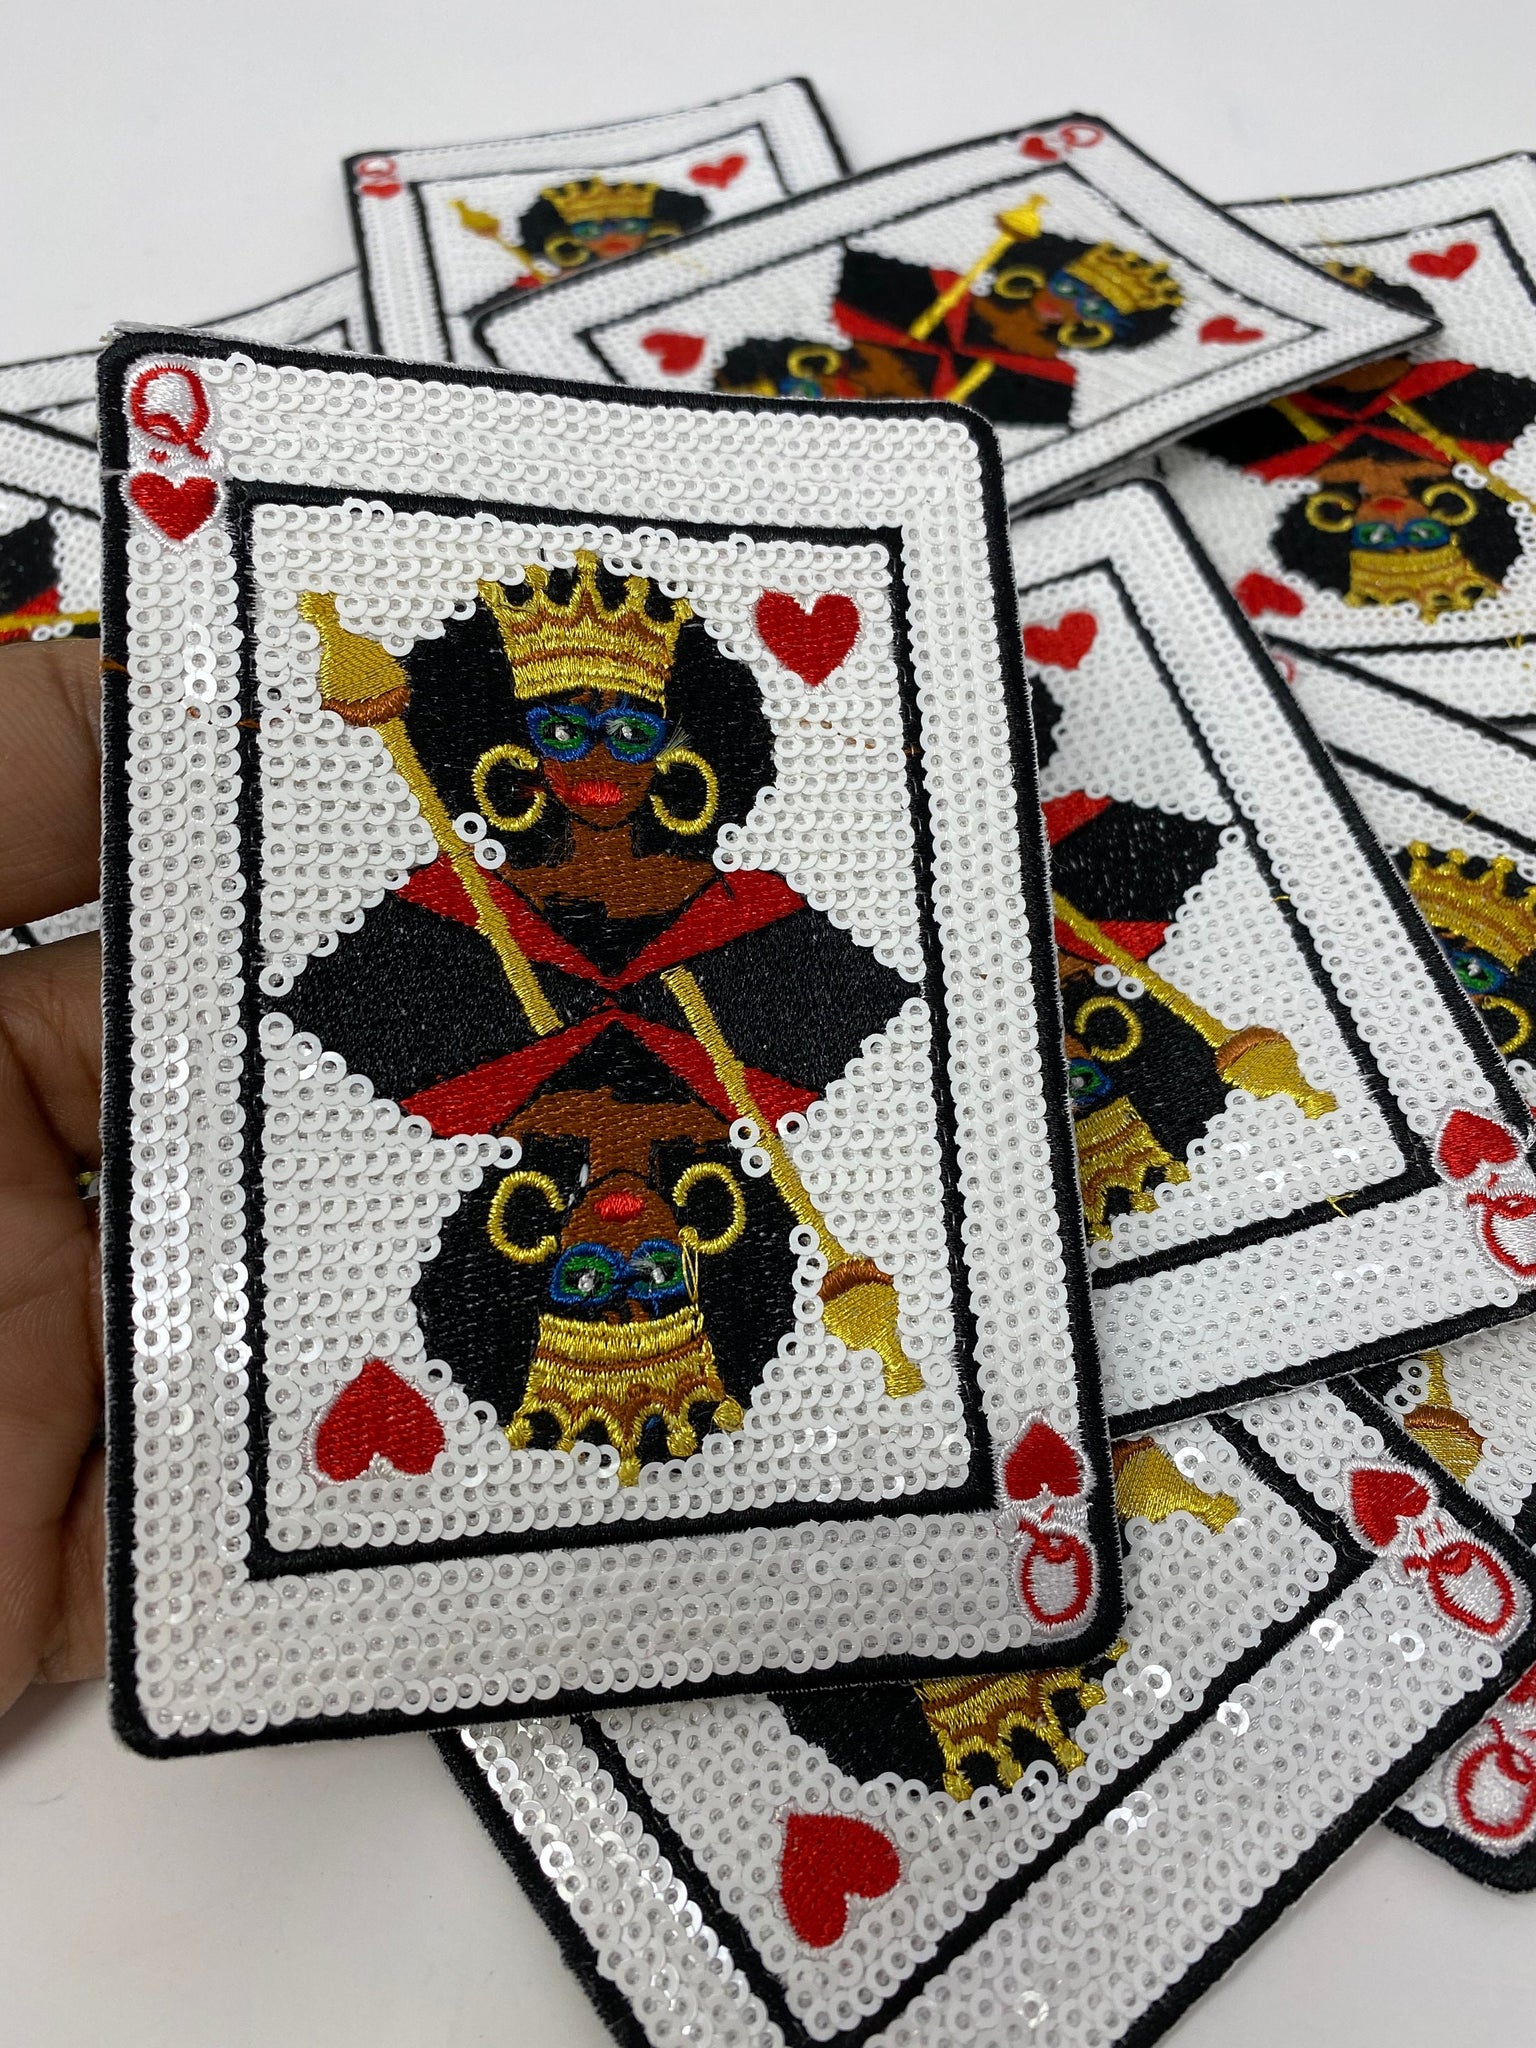 NEW, "Queen of Hearts SEQUINS" Embroidered Playing Card Patches/Appliques, Fun, Patch, 4.5" x 3" Size Playing Card